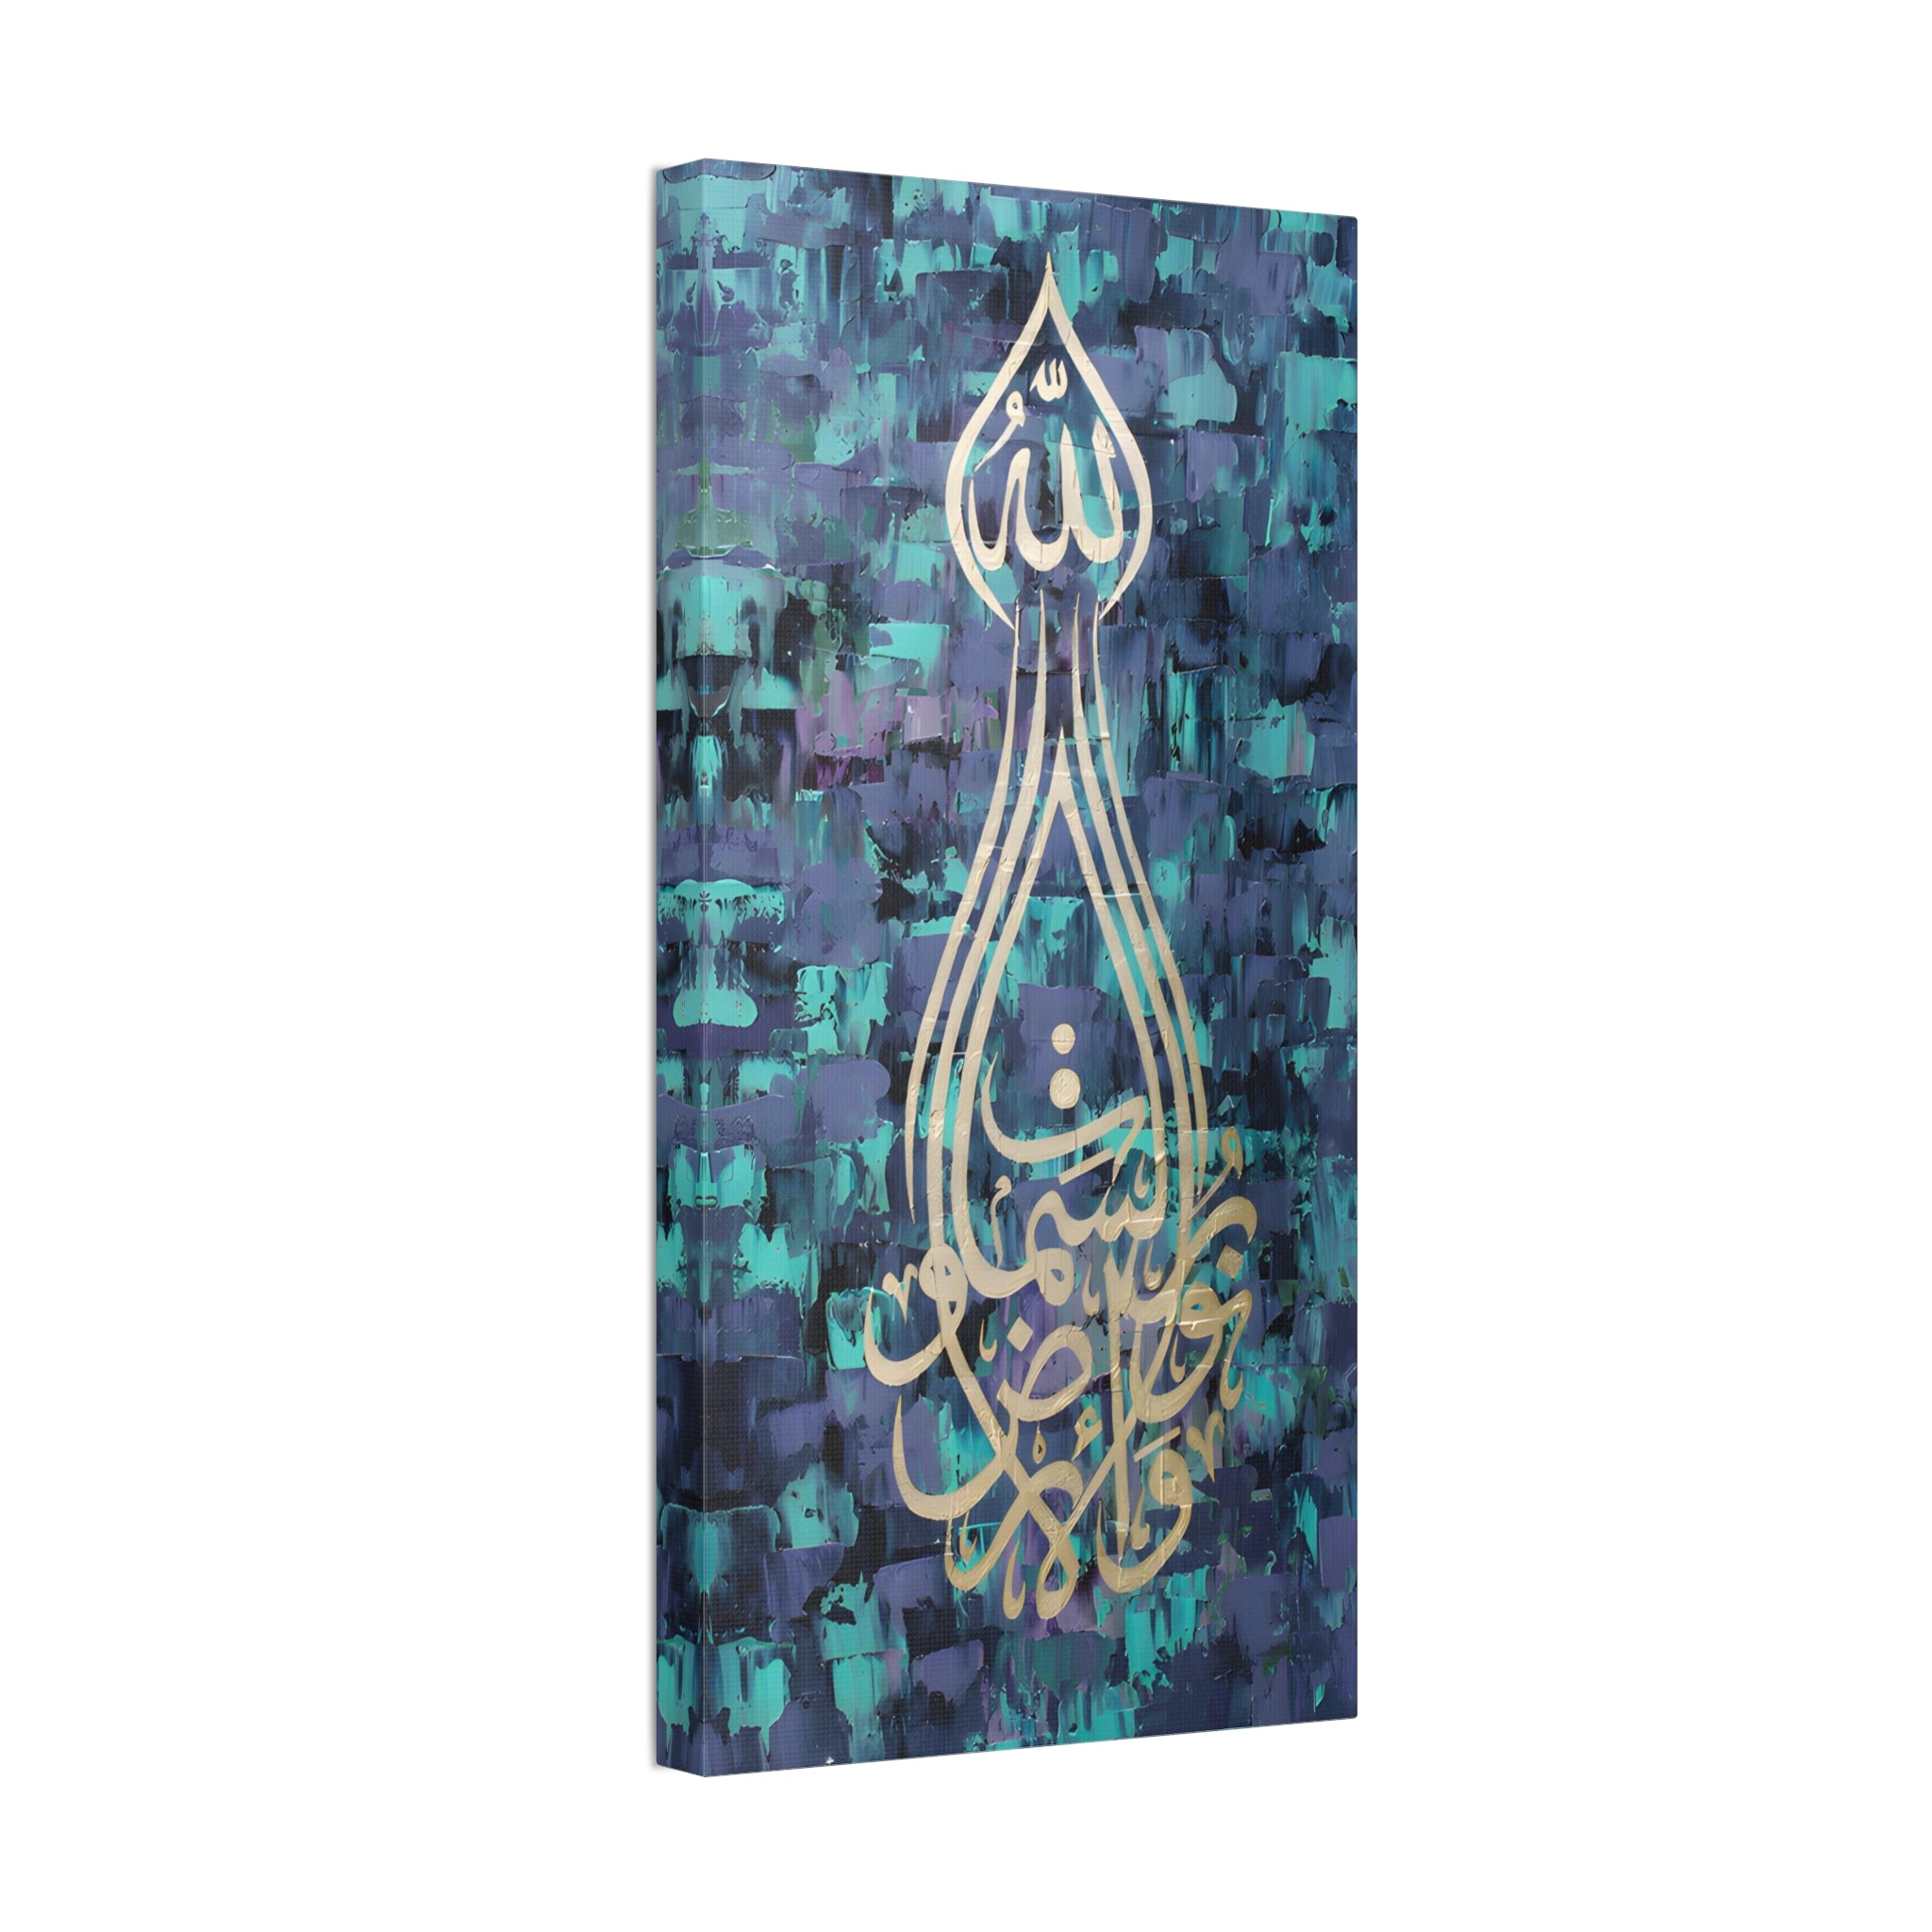 Allah Is The Light Of The Heavens And Earth - Canvas Wall Art - Islamic Art UK